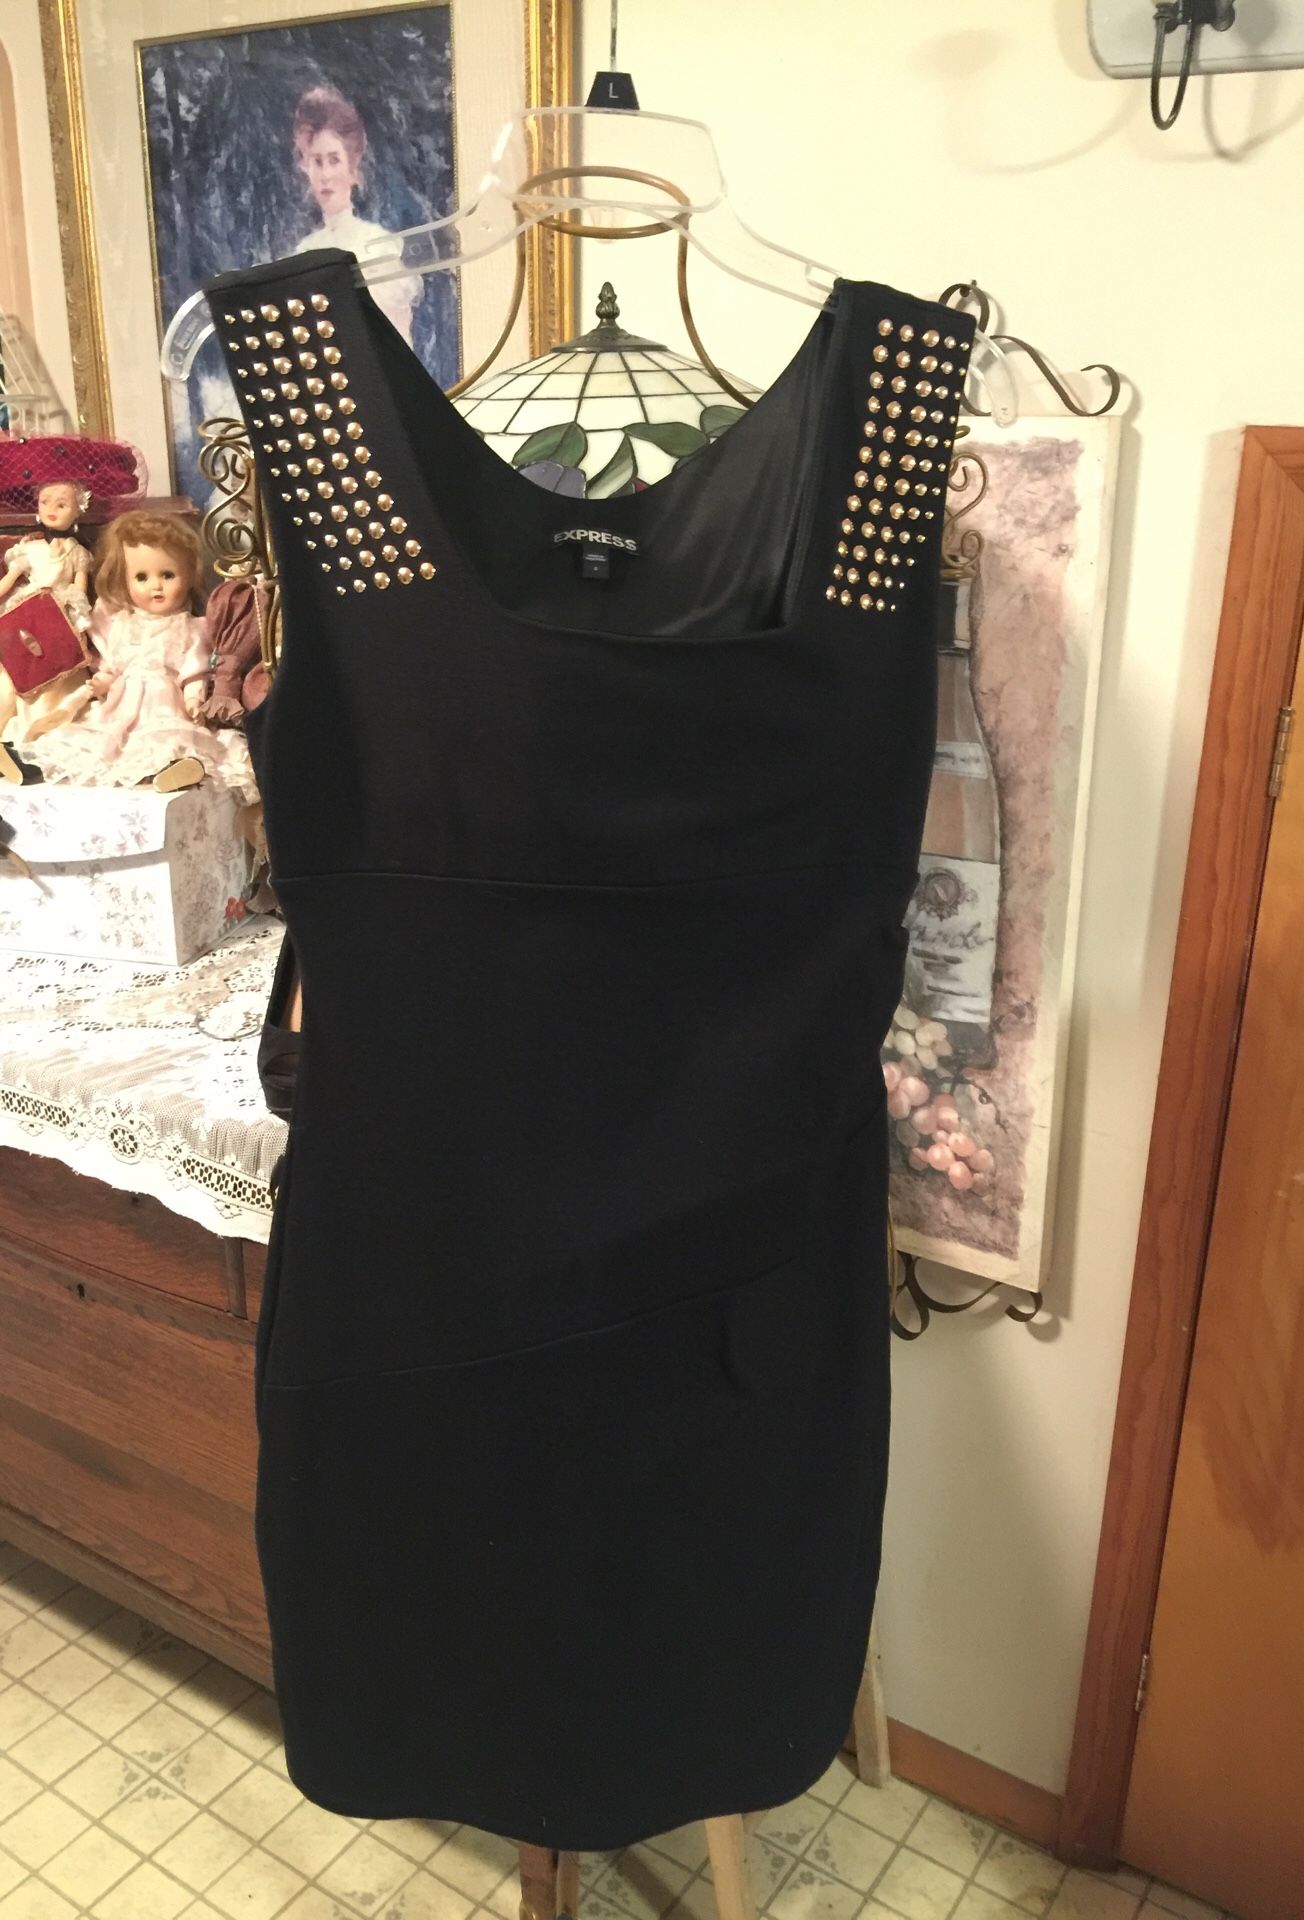 Designer Express” black stretch sheath square neck with gold foments trendy Chic dress “ work dates cute style side zip easy care sz6 misses a classi